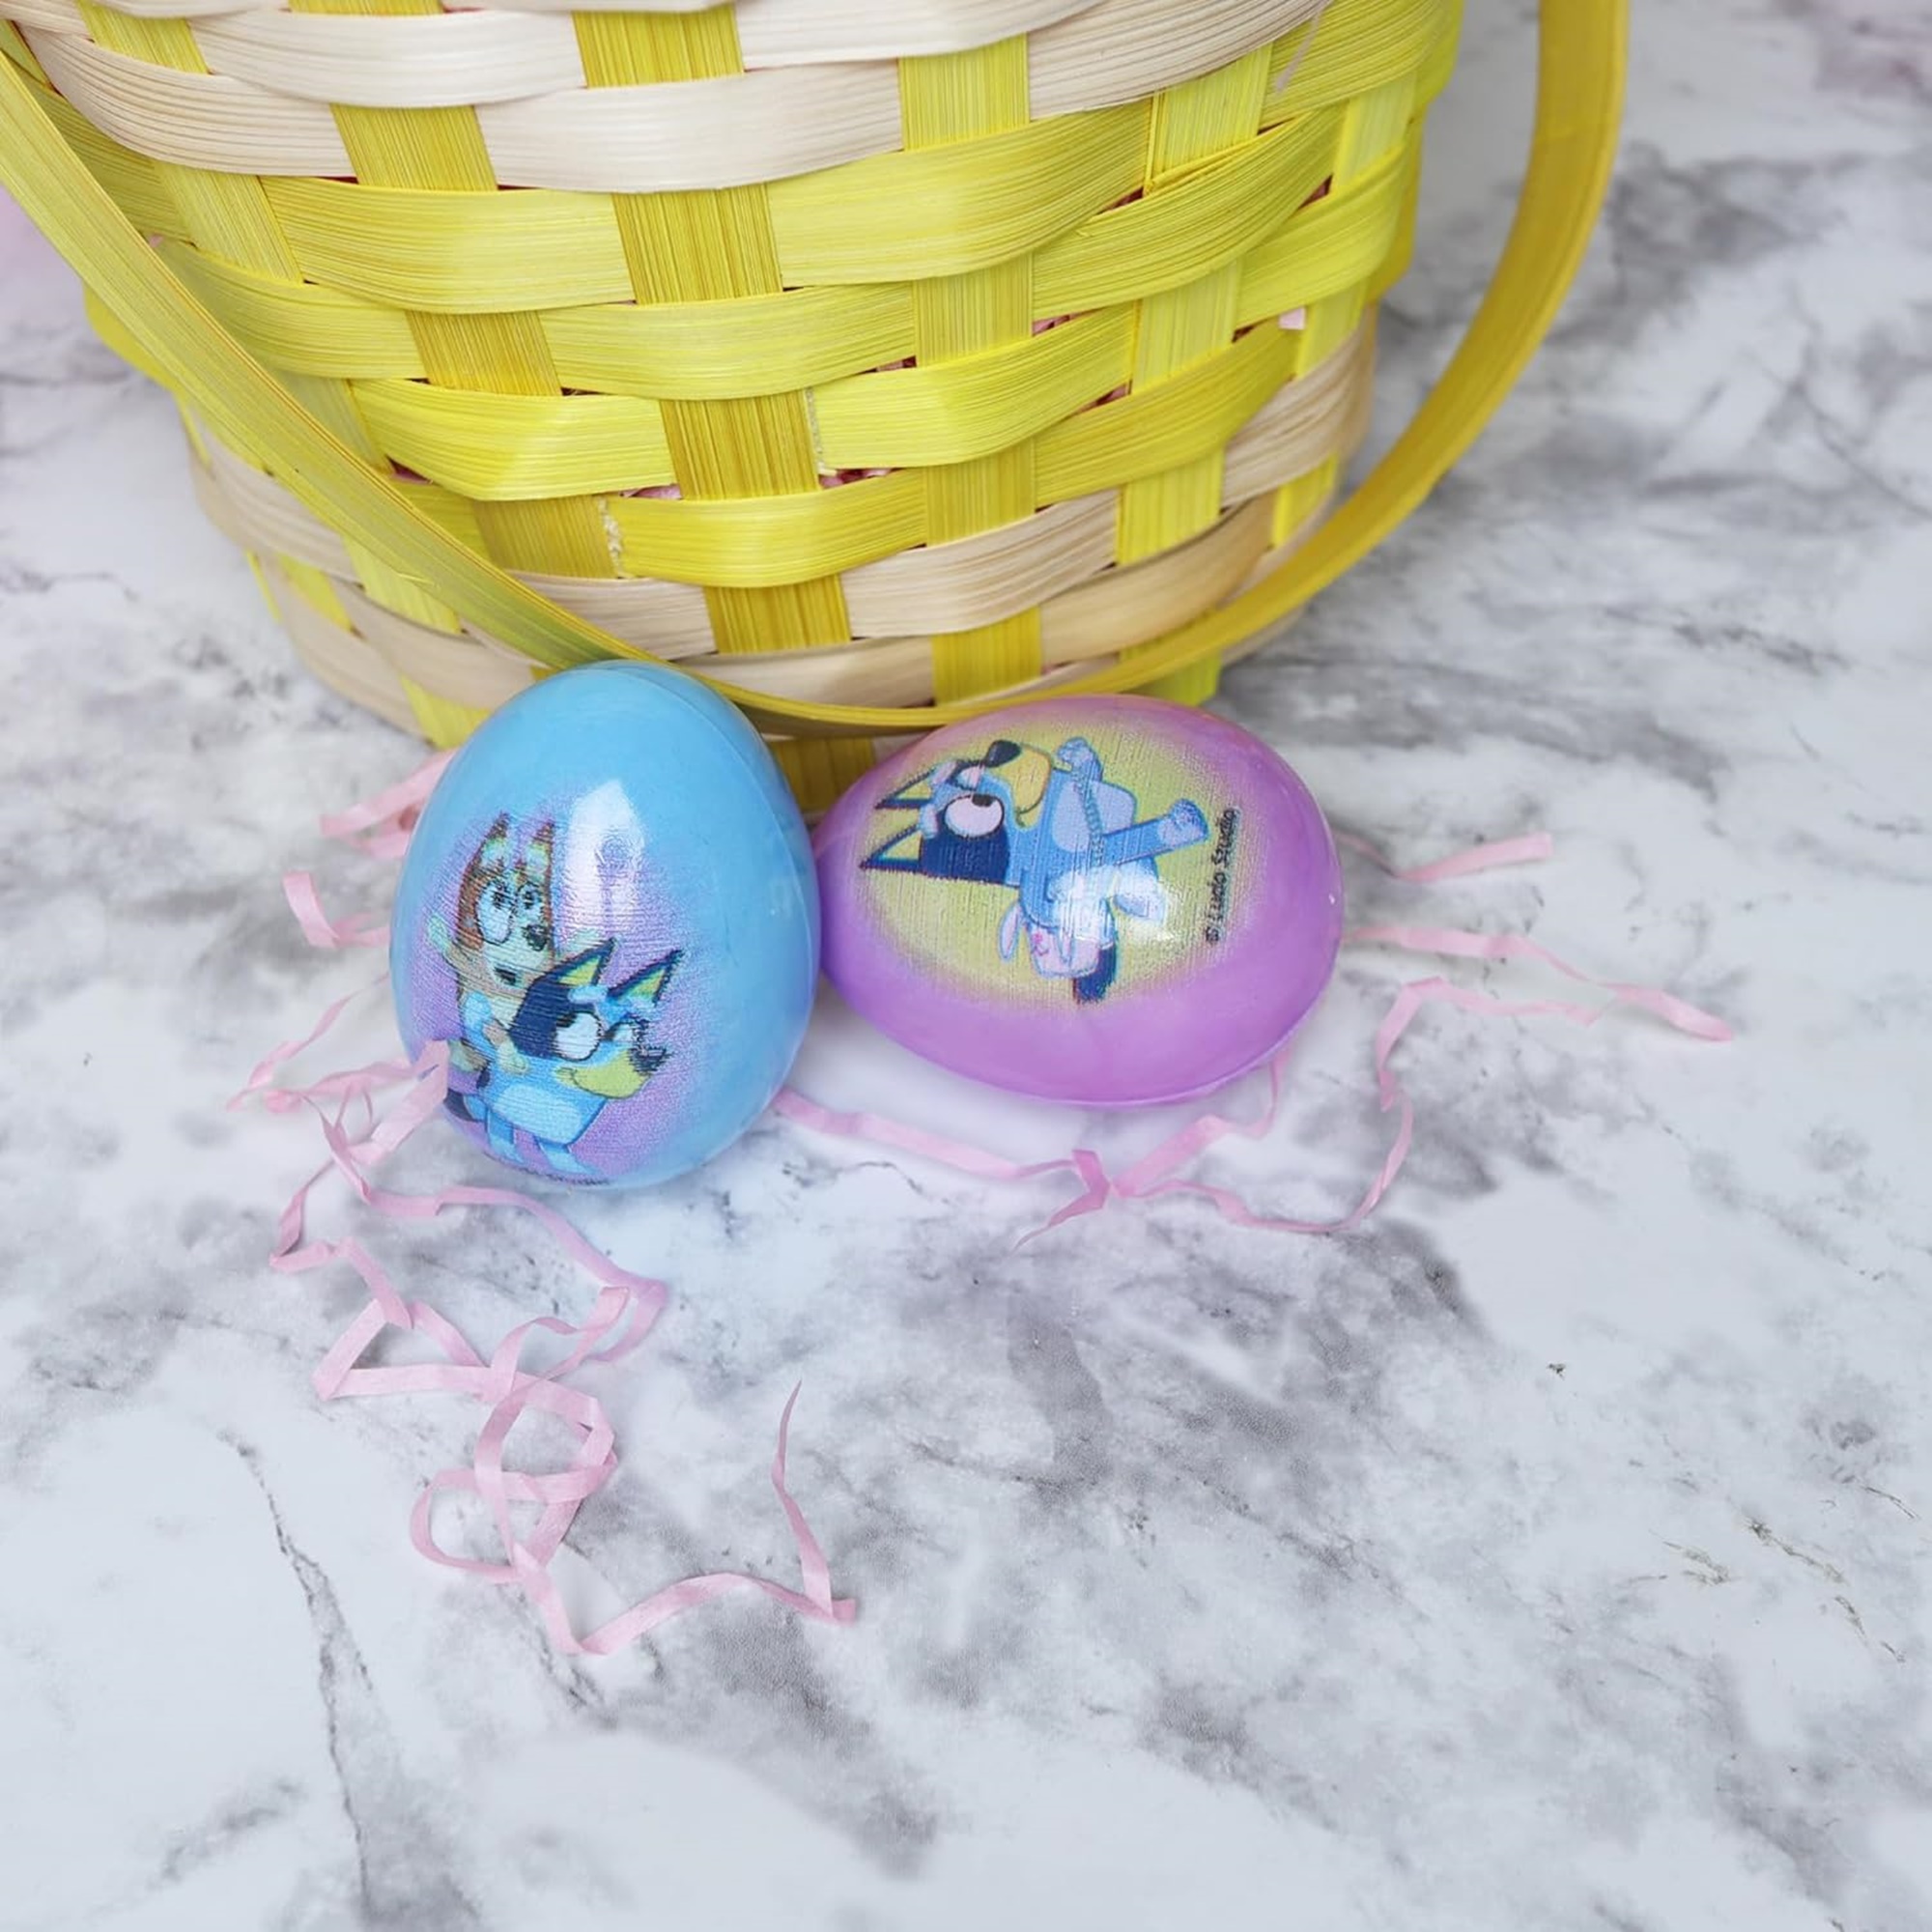 Bluey 14ct Printed Easter Eggs with Candy, 2.47 Ounces - image 3 of 7